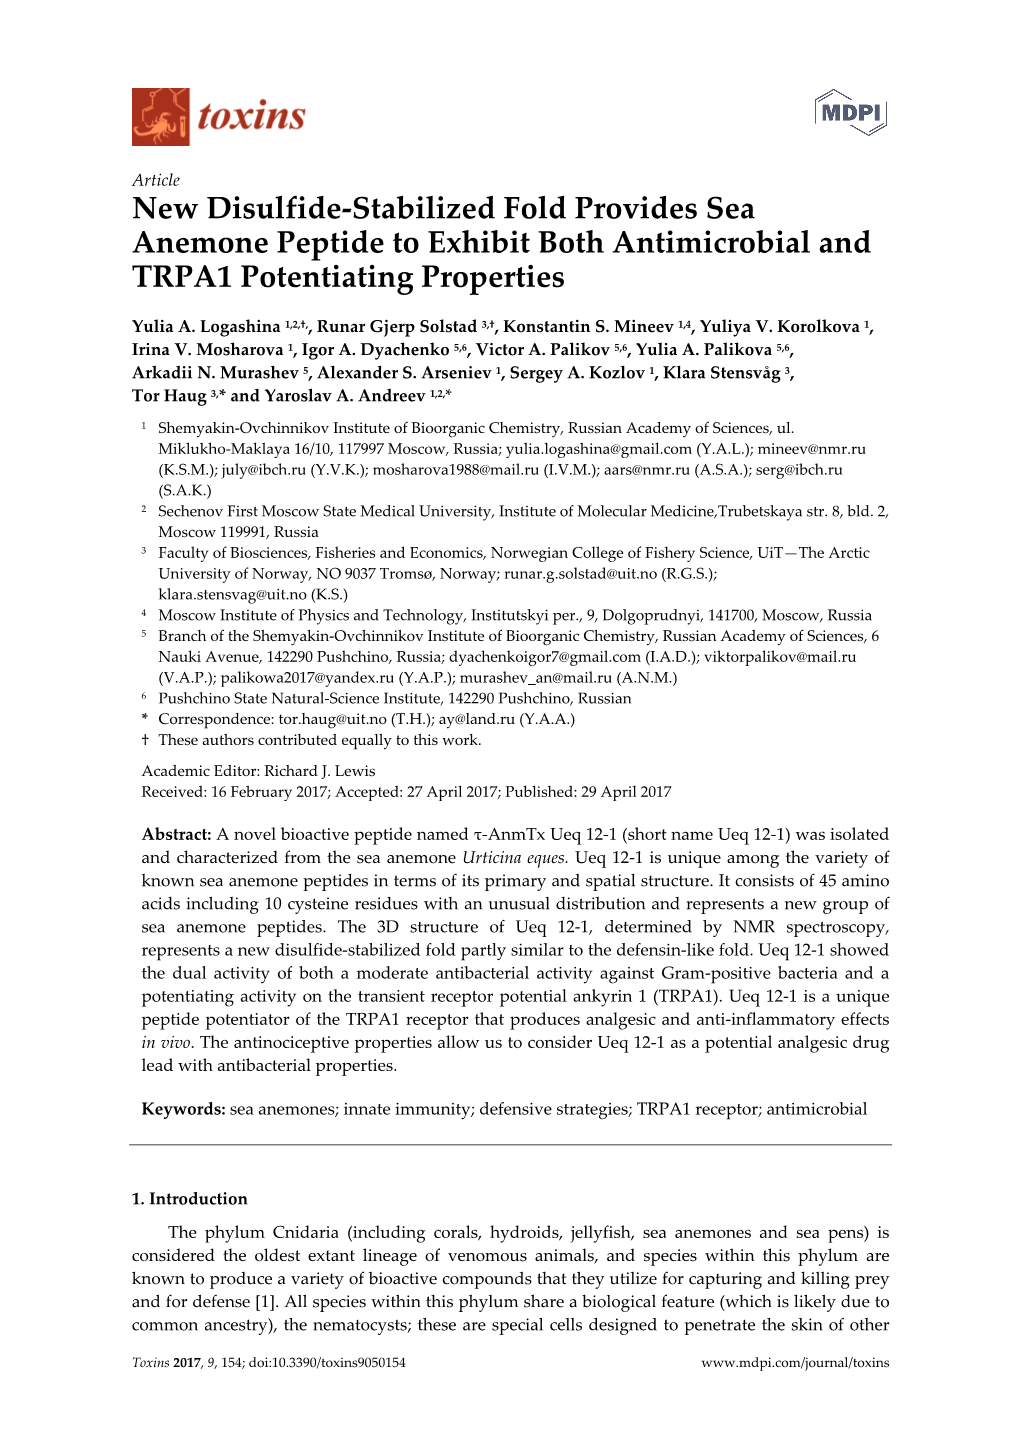 New Disulfide-Stabilized Fold Provides Sea Anemone Peptide to Exhibit Both Antimicrobial and TRPA1 Potentiating Properties